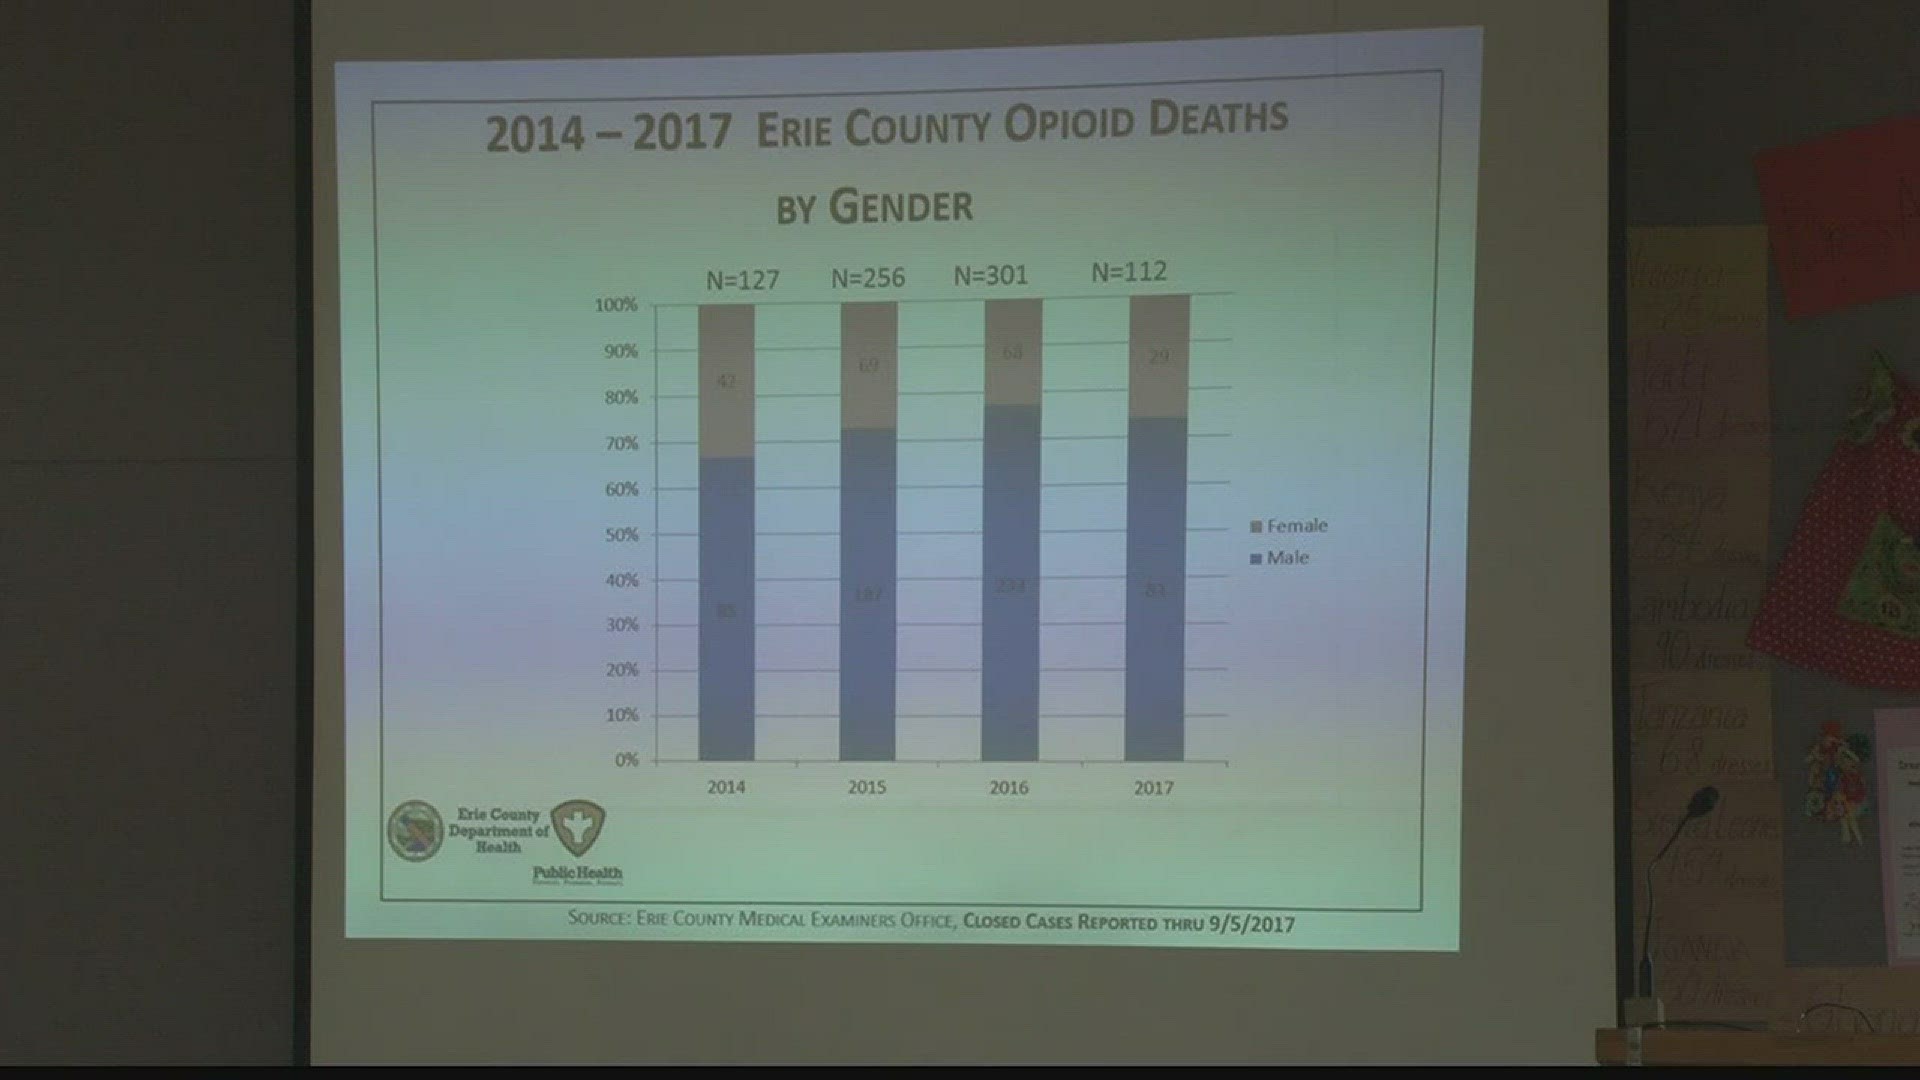 Health Department Coordinator Cheryl Moore told a workshop at the North Presbyterian Church in Amherst that overdose deaths steadily rose in recent years to 301 in 2016.